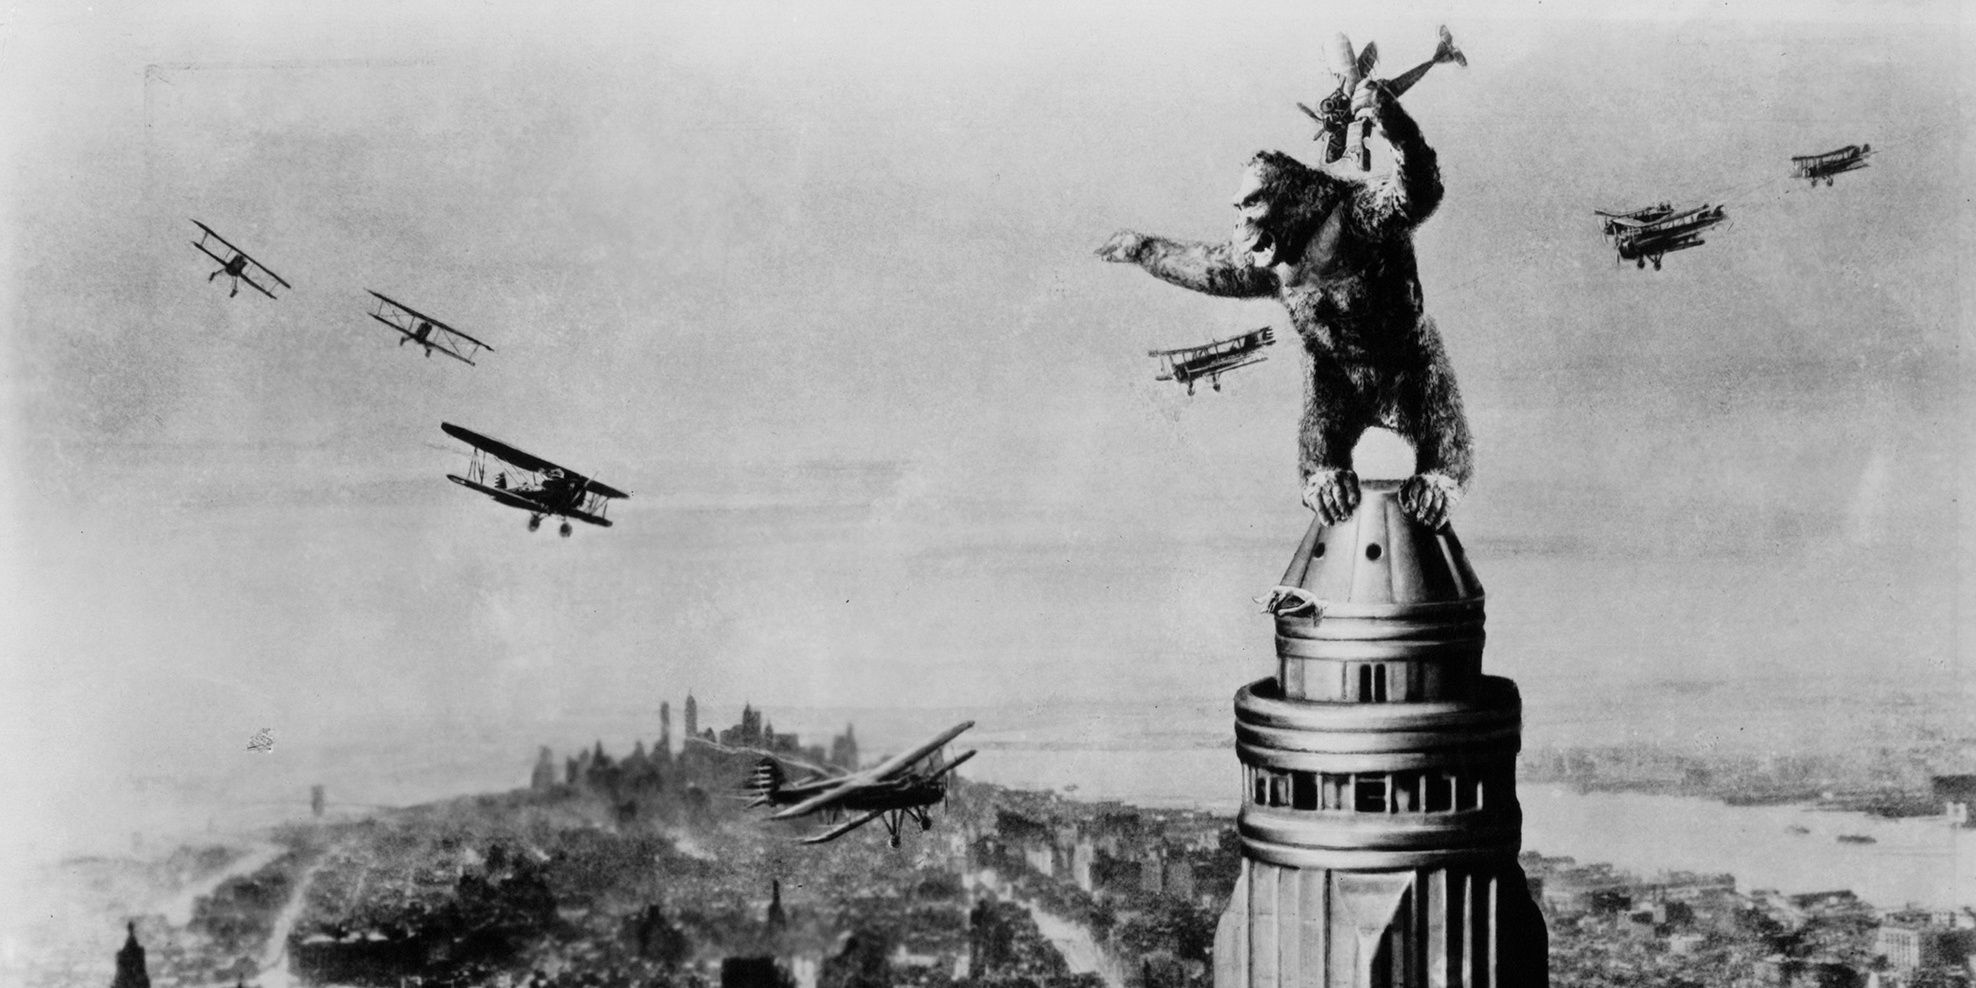 King Kong on top of the Empire State Building surrounded by planes in original 1933 King Kong film